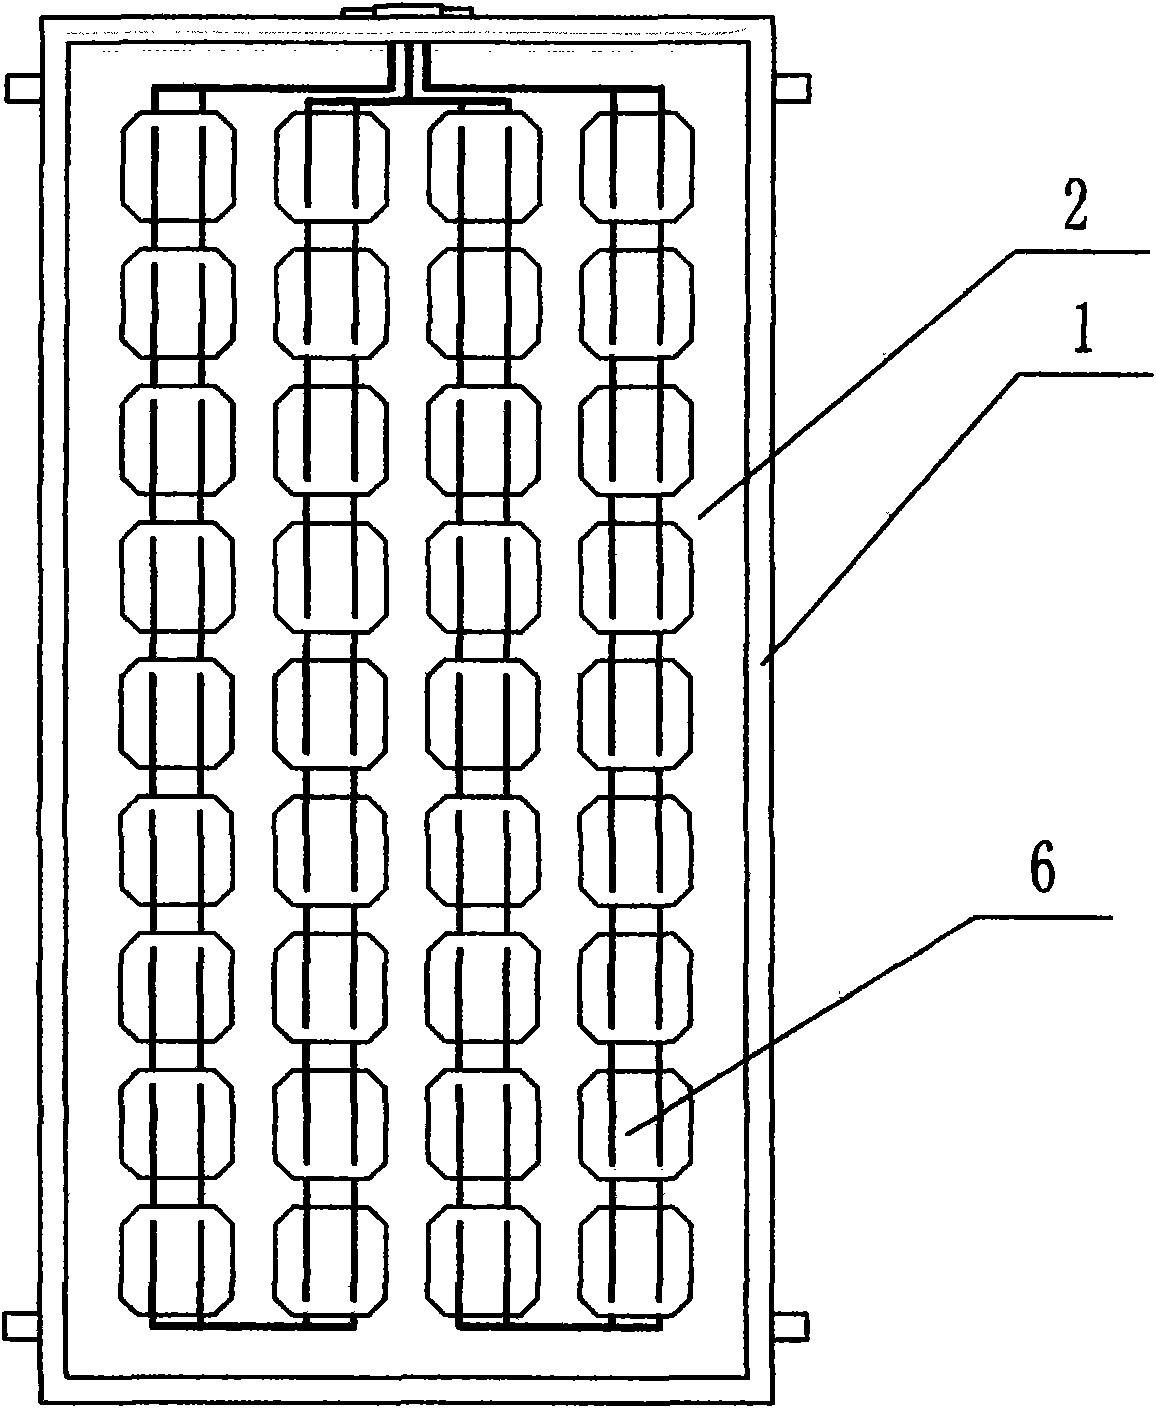 Integrated solar heat collection power generation assembly